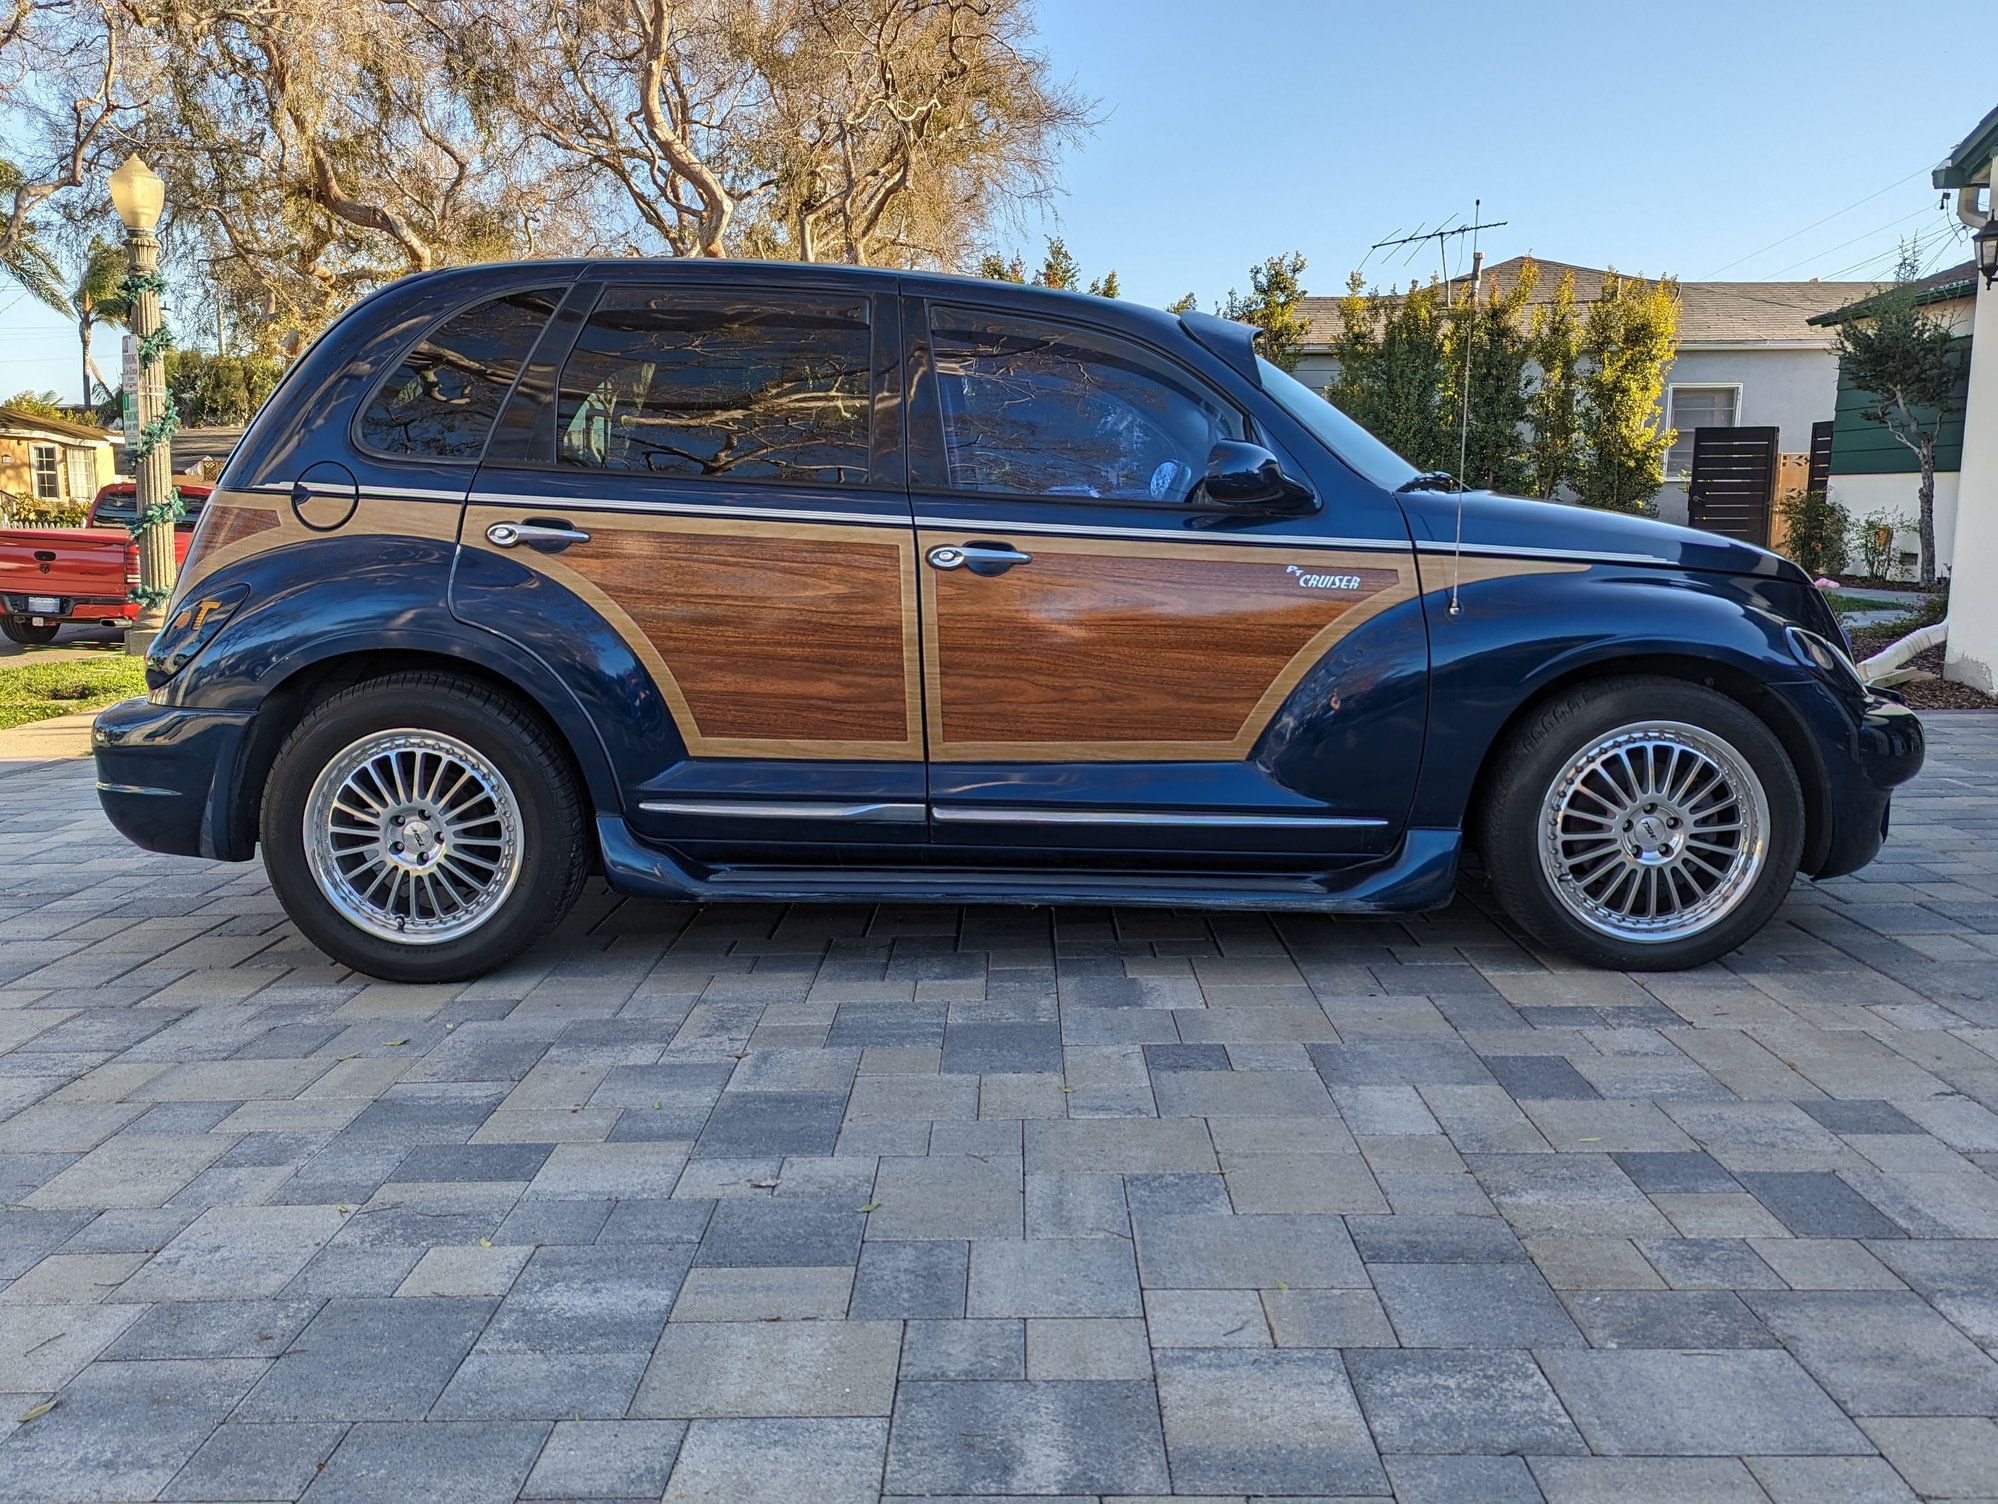 2004 Chrysler PT Cruiser - 2004 Chrysler PT Cruiser Limited "Woody Turbo Classic - One of a Kind" - Used - VIN 3C8FY68854T209578 - 117,979 Miles - 4 cyl - 2WD - Sedan - Blue - Los Angeles, CA 90066, United States